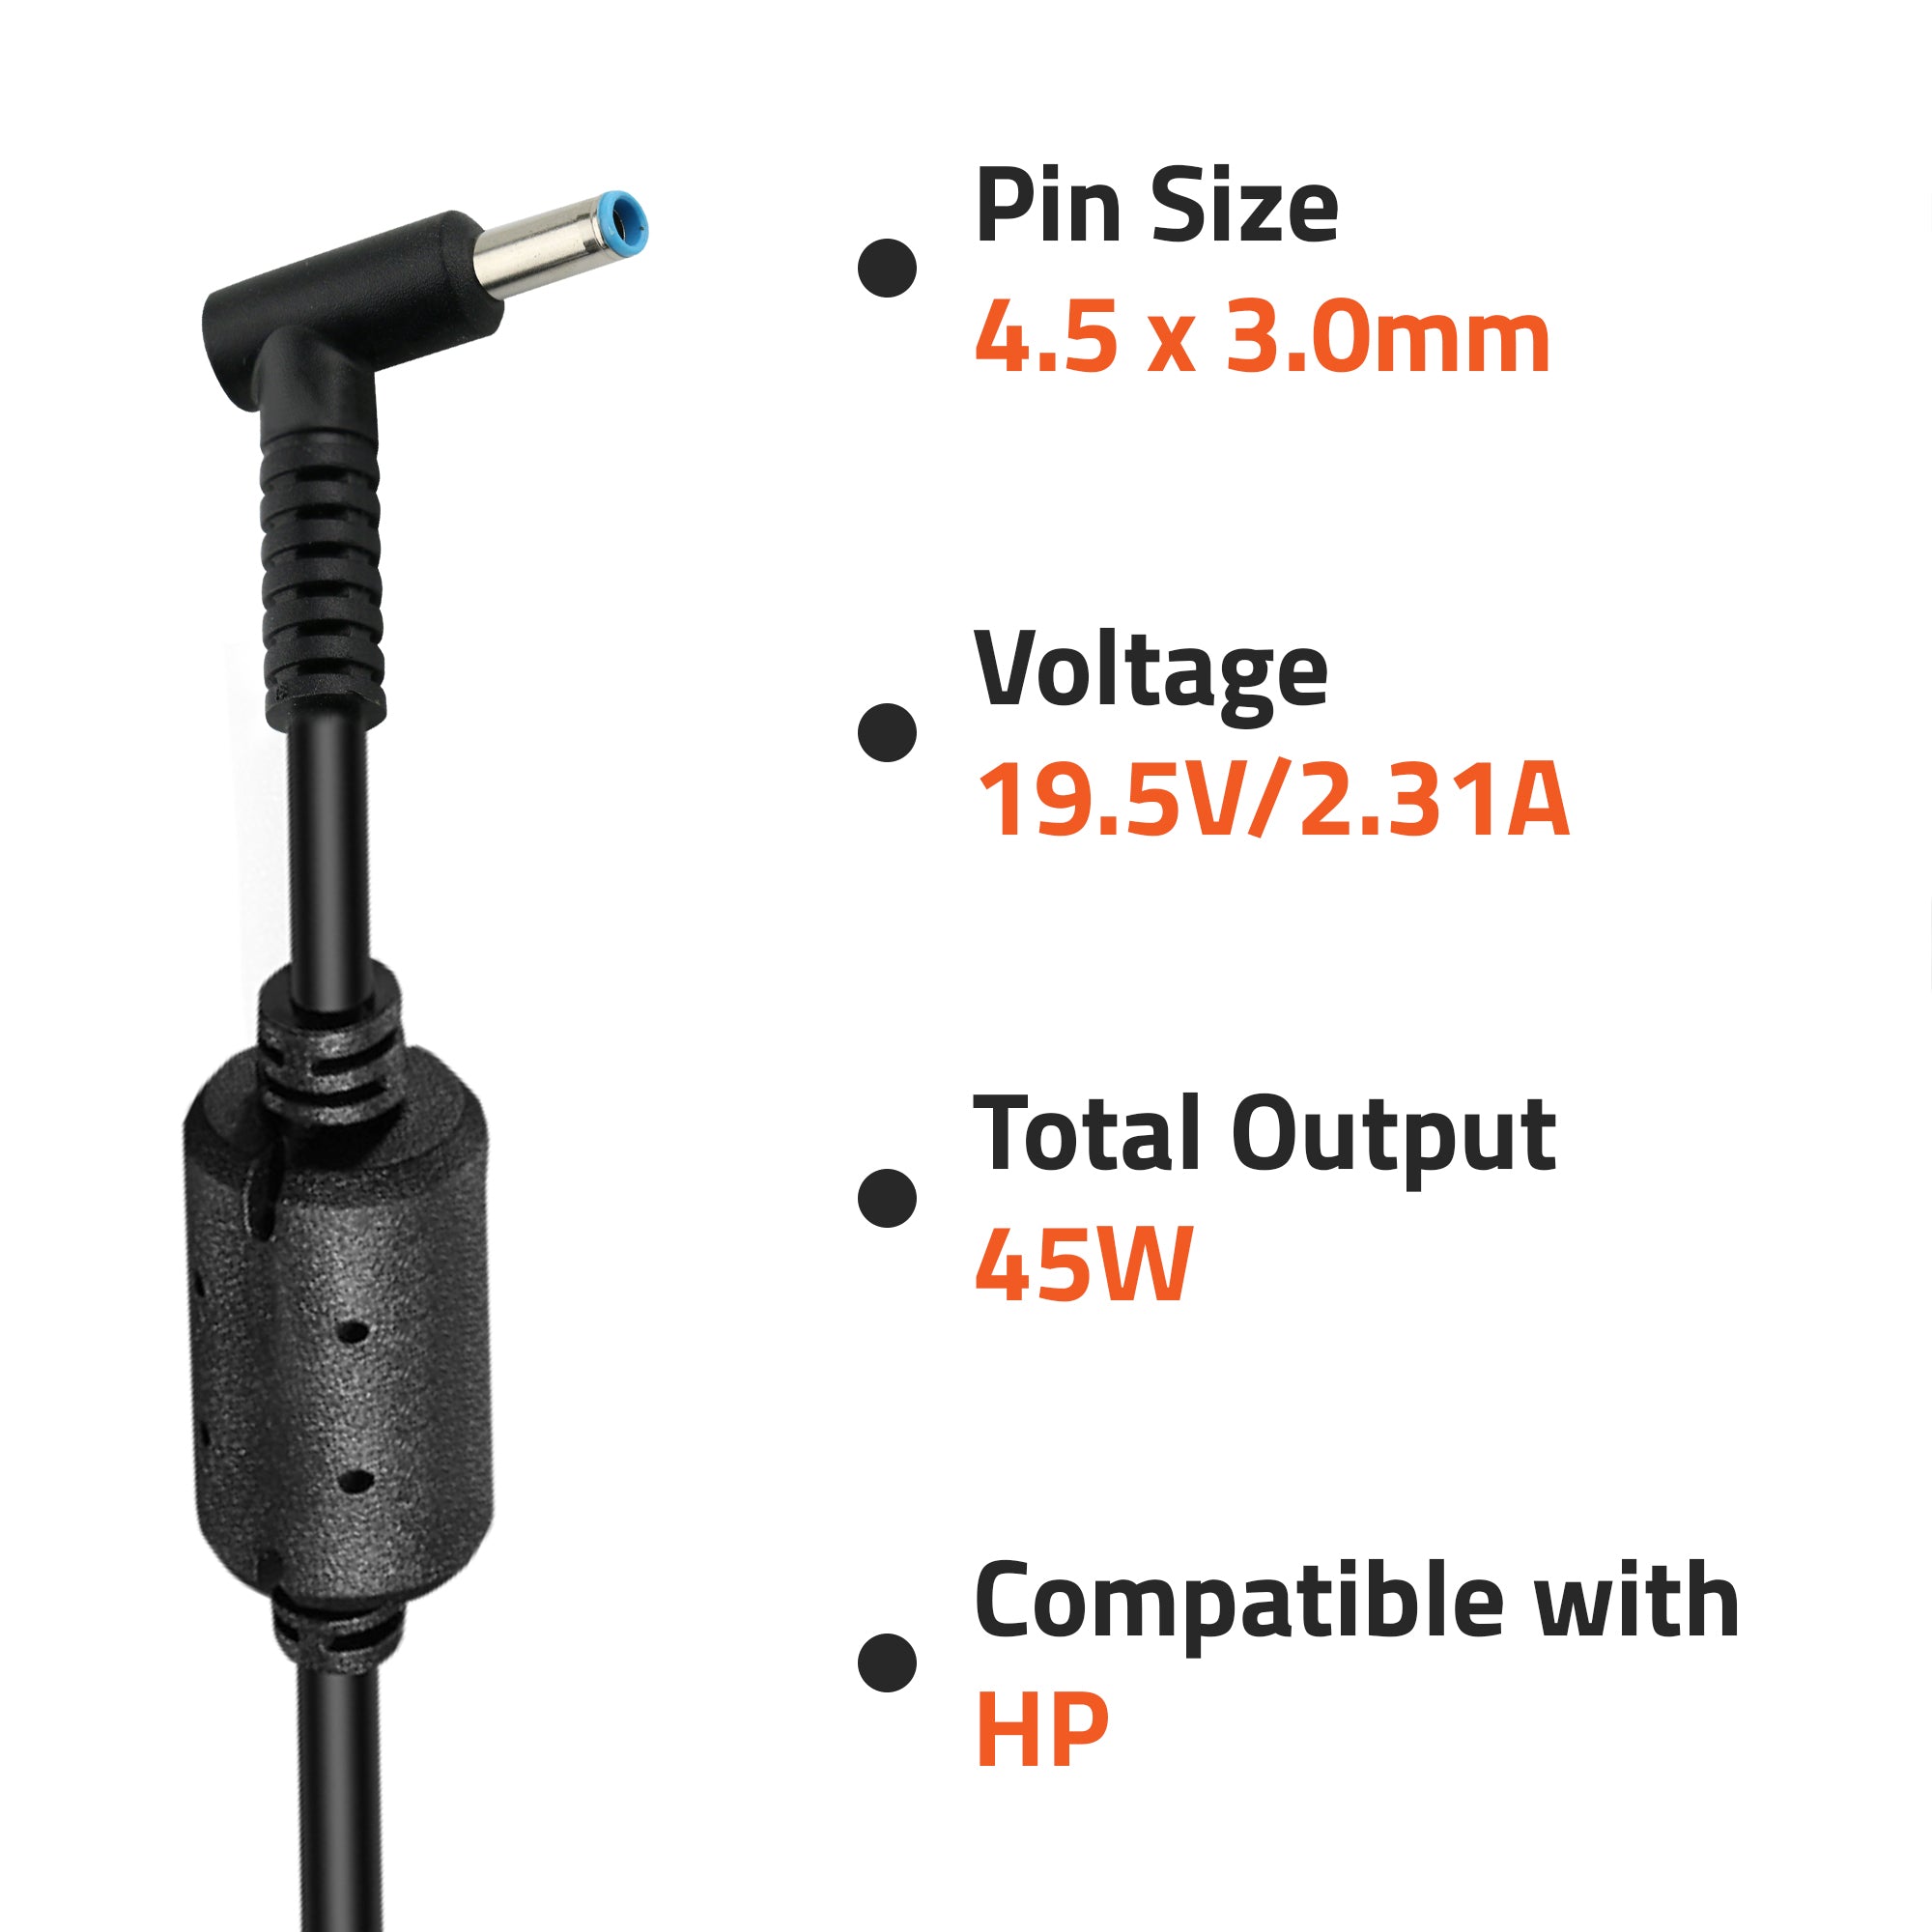 A0407 45Watt Laptop Adapter Compatible with HP Laptops (19.5V/2.31A ,Pin : 4.5 x 3.0 mm)